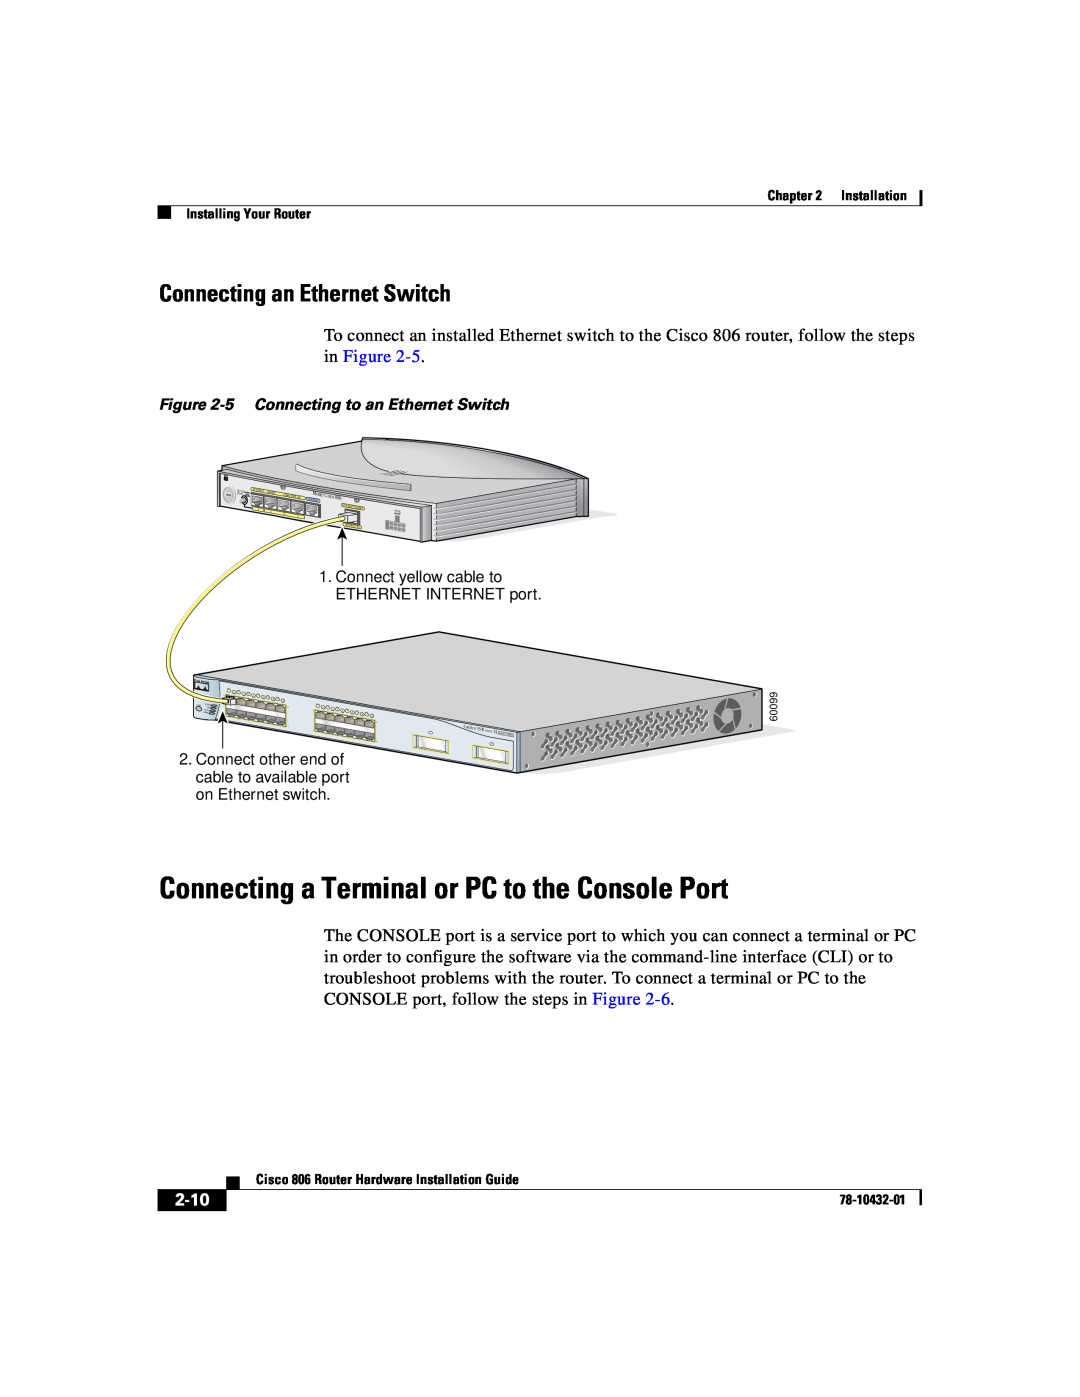 Cisco Systems 806 manual Connecting a Terminal or PC to the Console Port, Connecting an Ethernet Switch, 2-10 